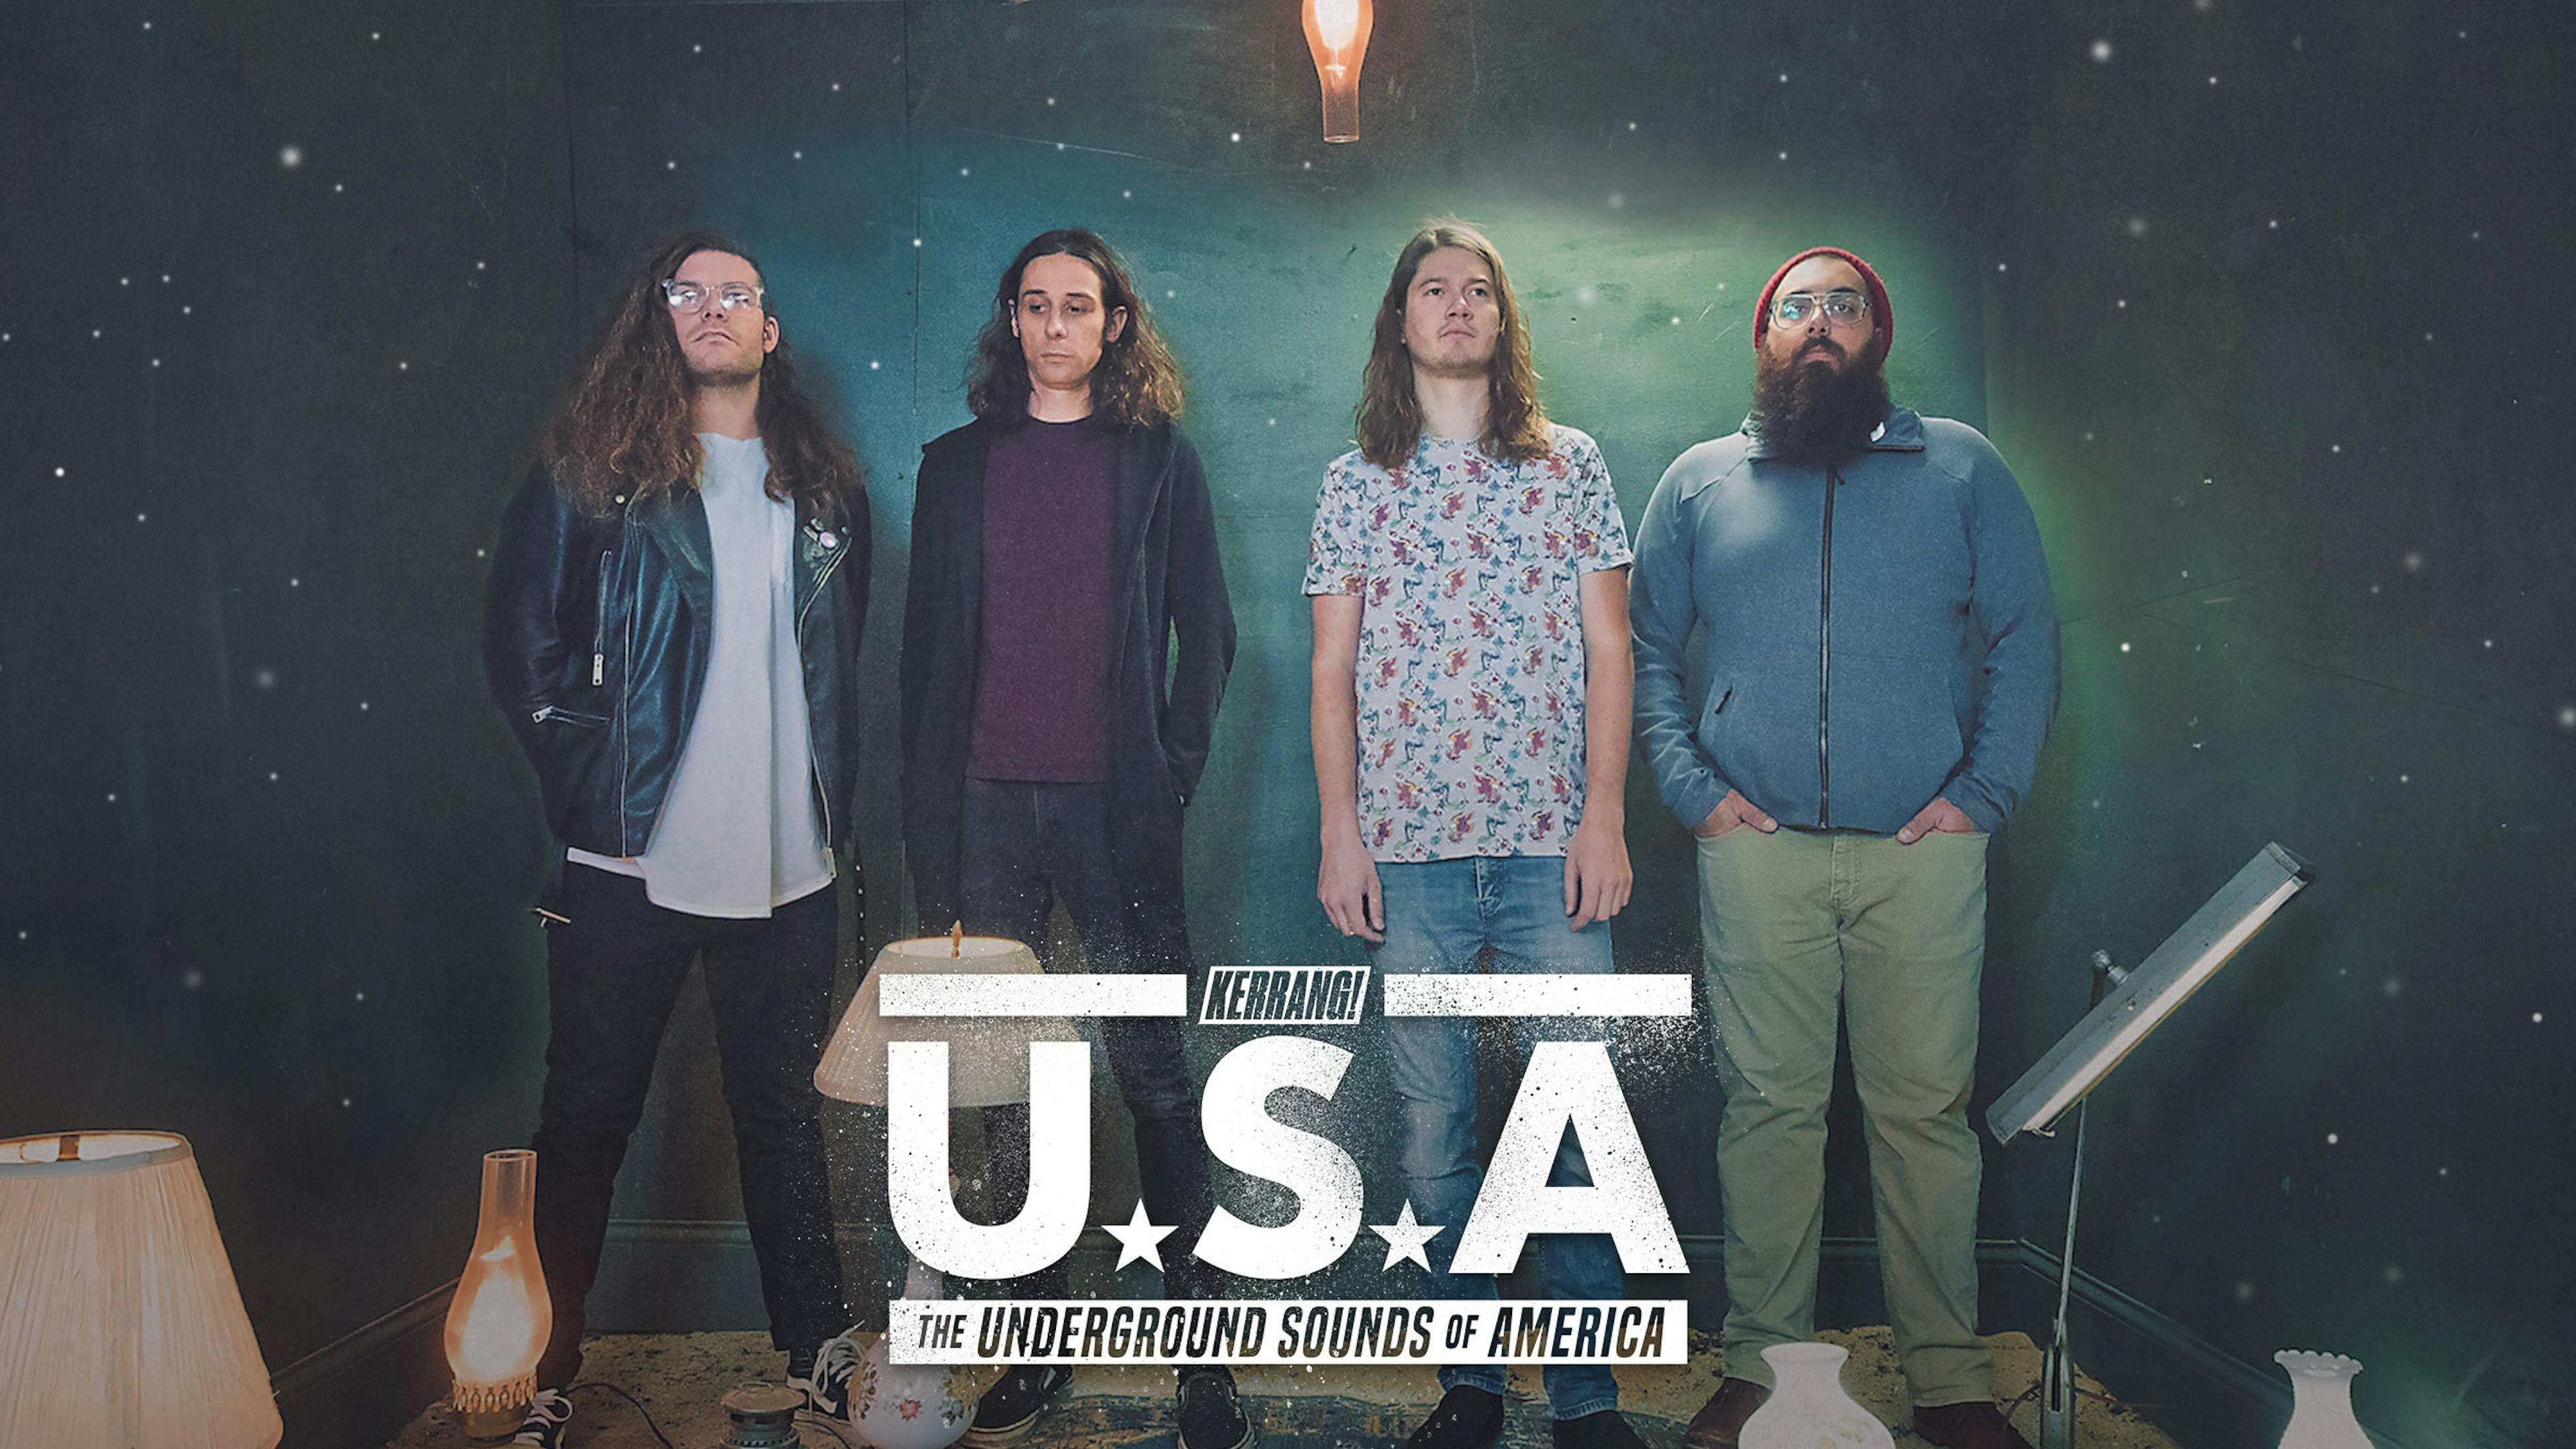 The Underground Sounds of America: Astronoid